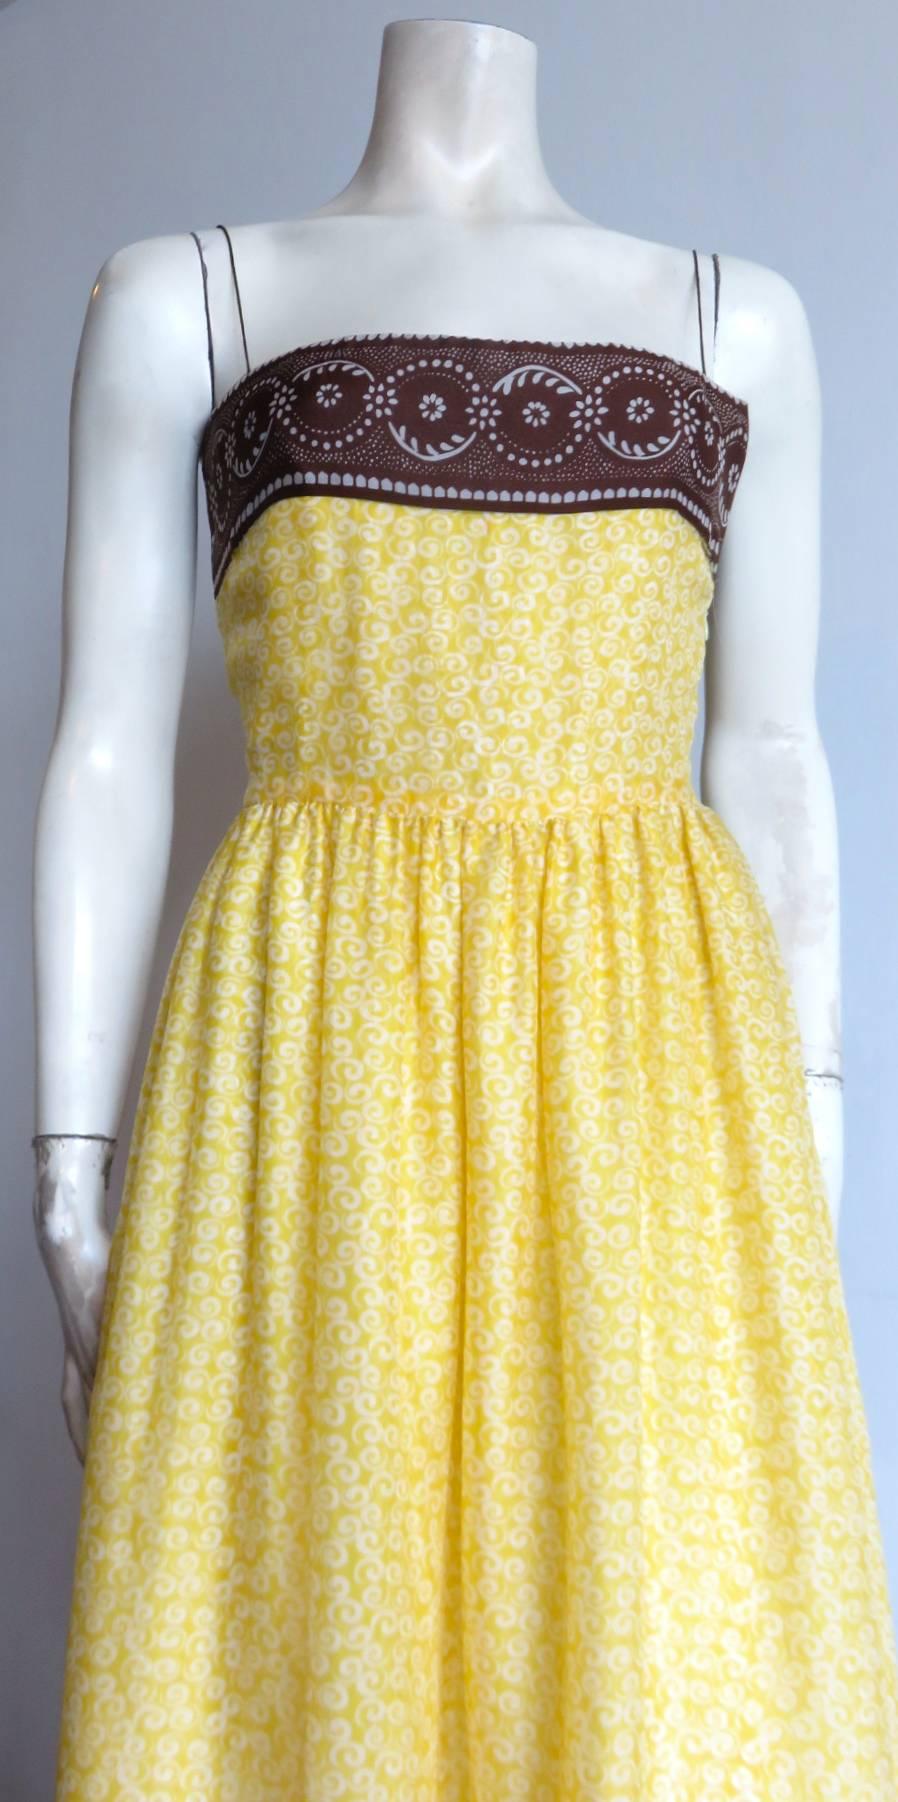 Gorgeous, 1990's, OSCAR DE LA RENTA printed silk georgette dress.

This wonderful dress features double-layered, sunshine yellow, and ivory printed, spiral artwork at main dress body with coca brown, and ivory, sunflower dotted print borders at